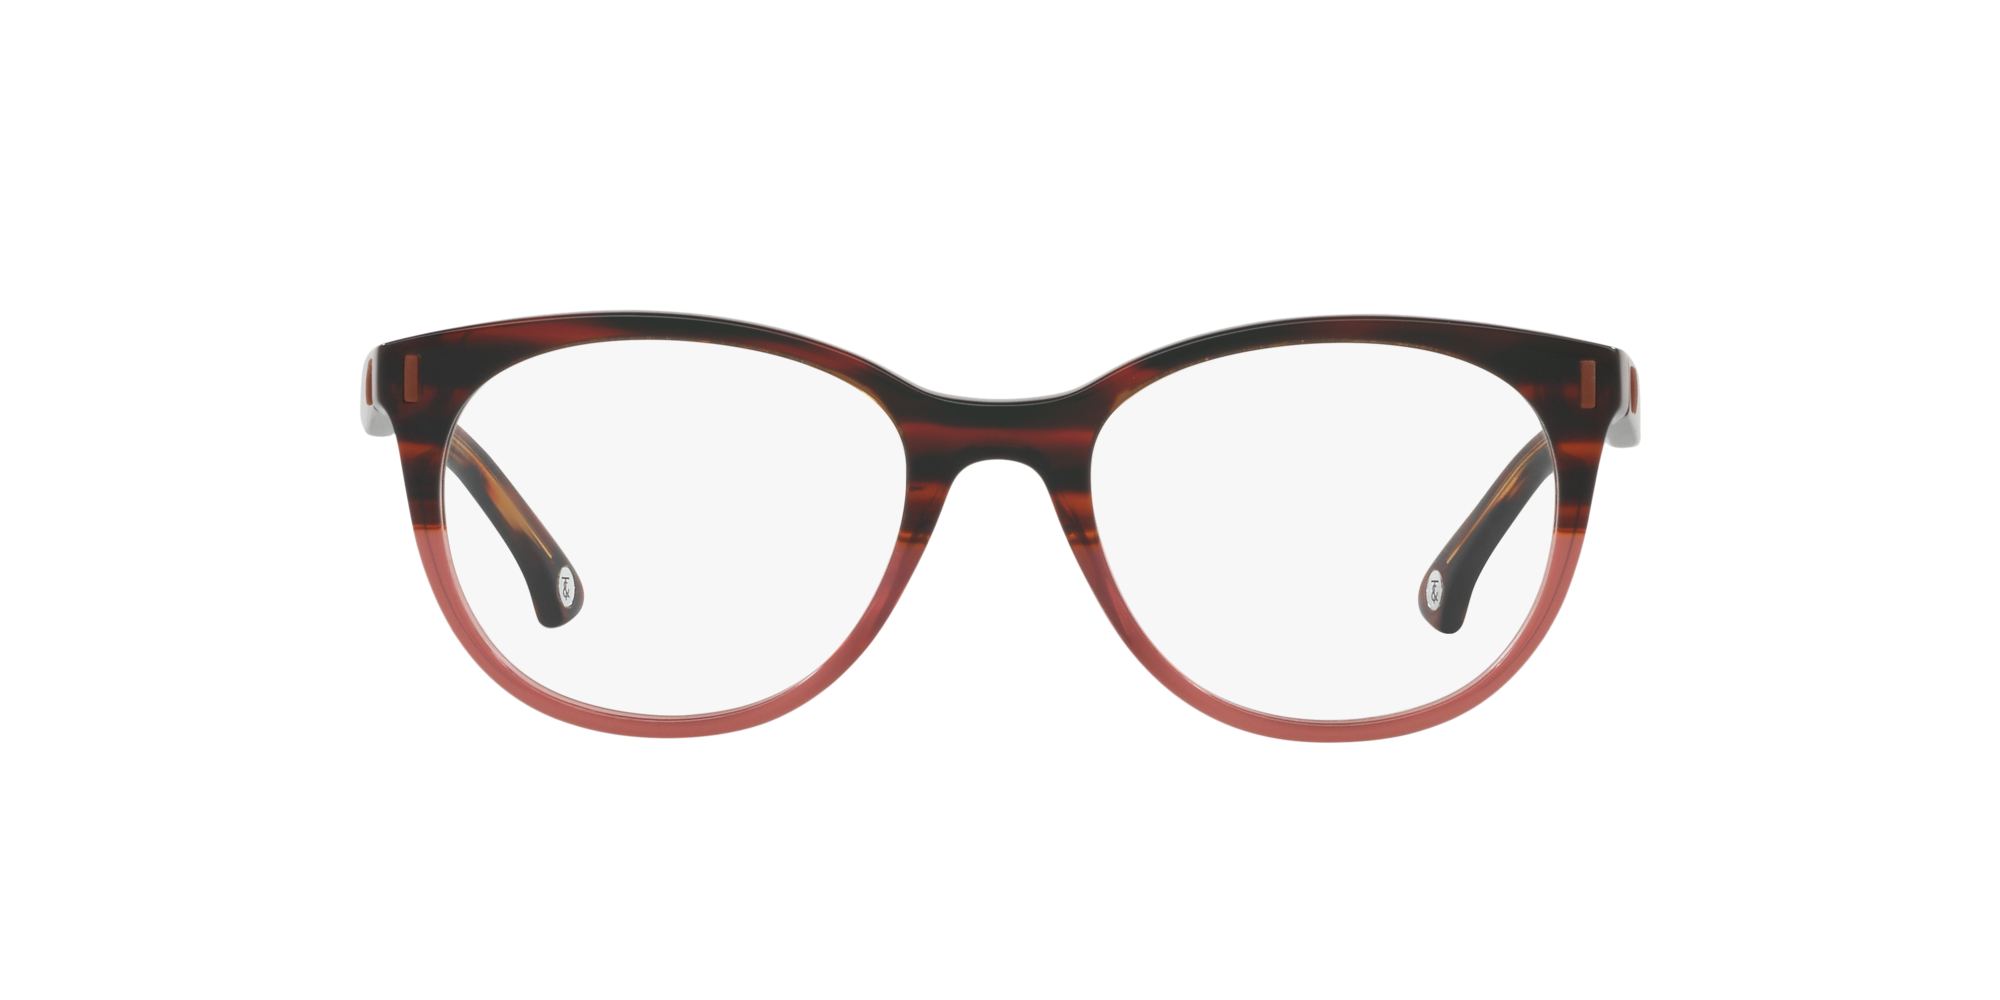 A New Day 0A32058 Glasses in Tortoise | Target Optical